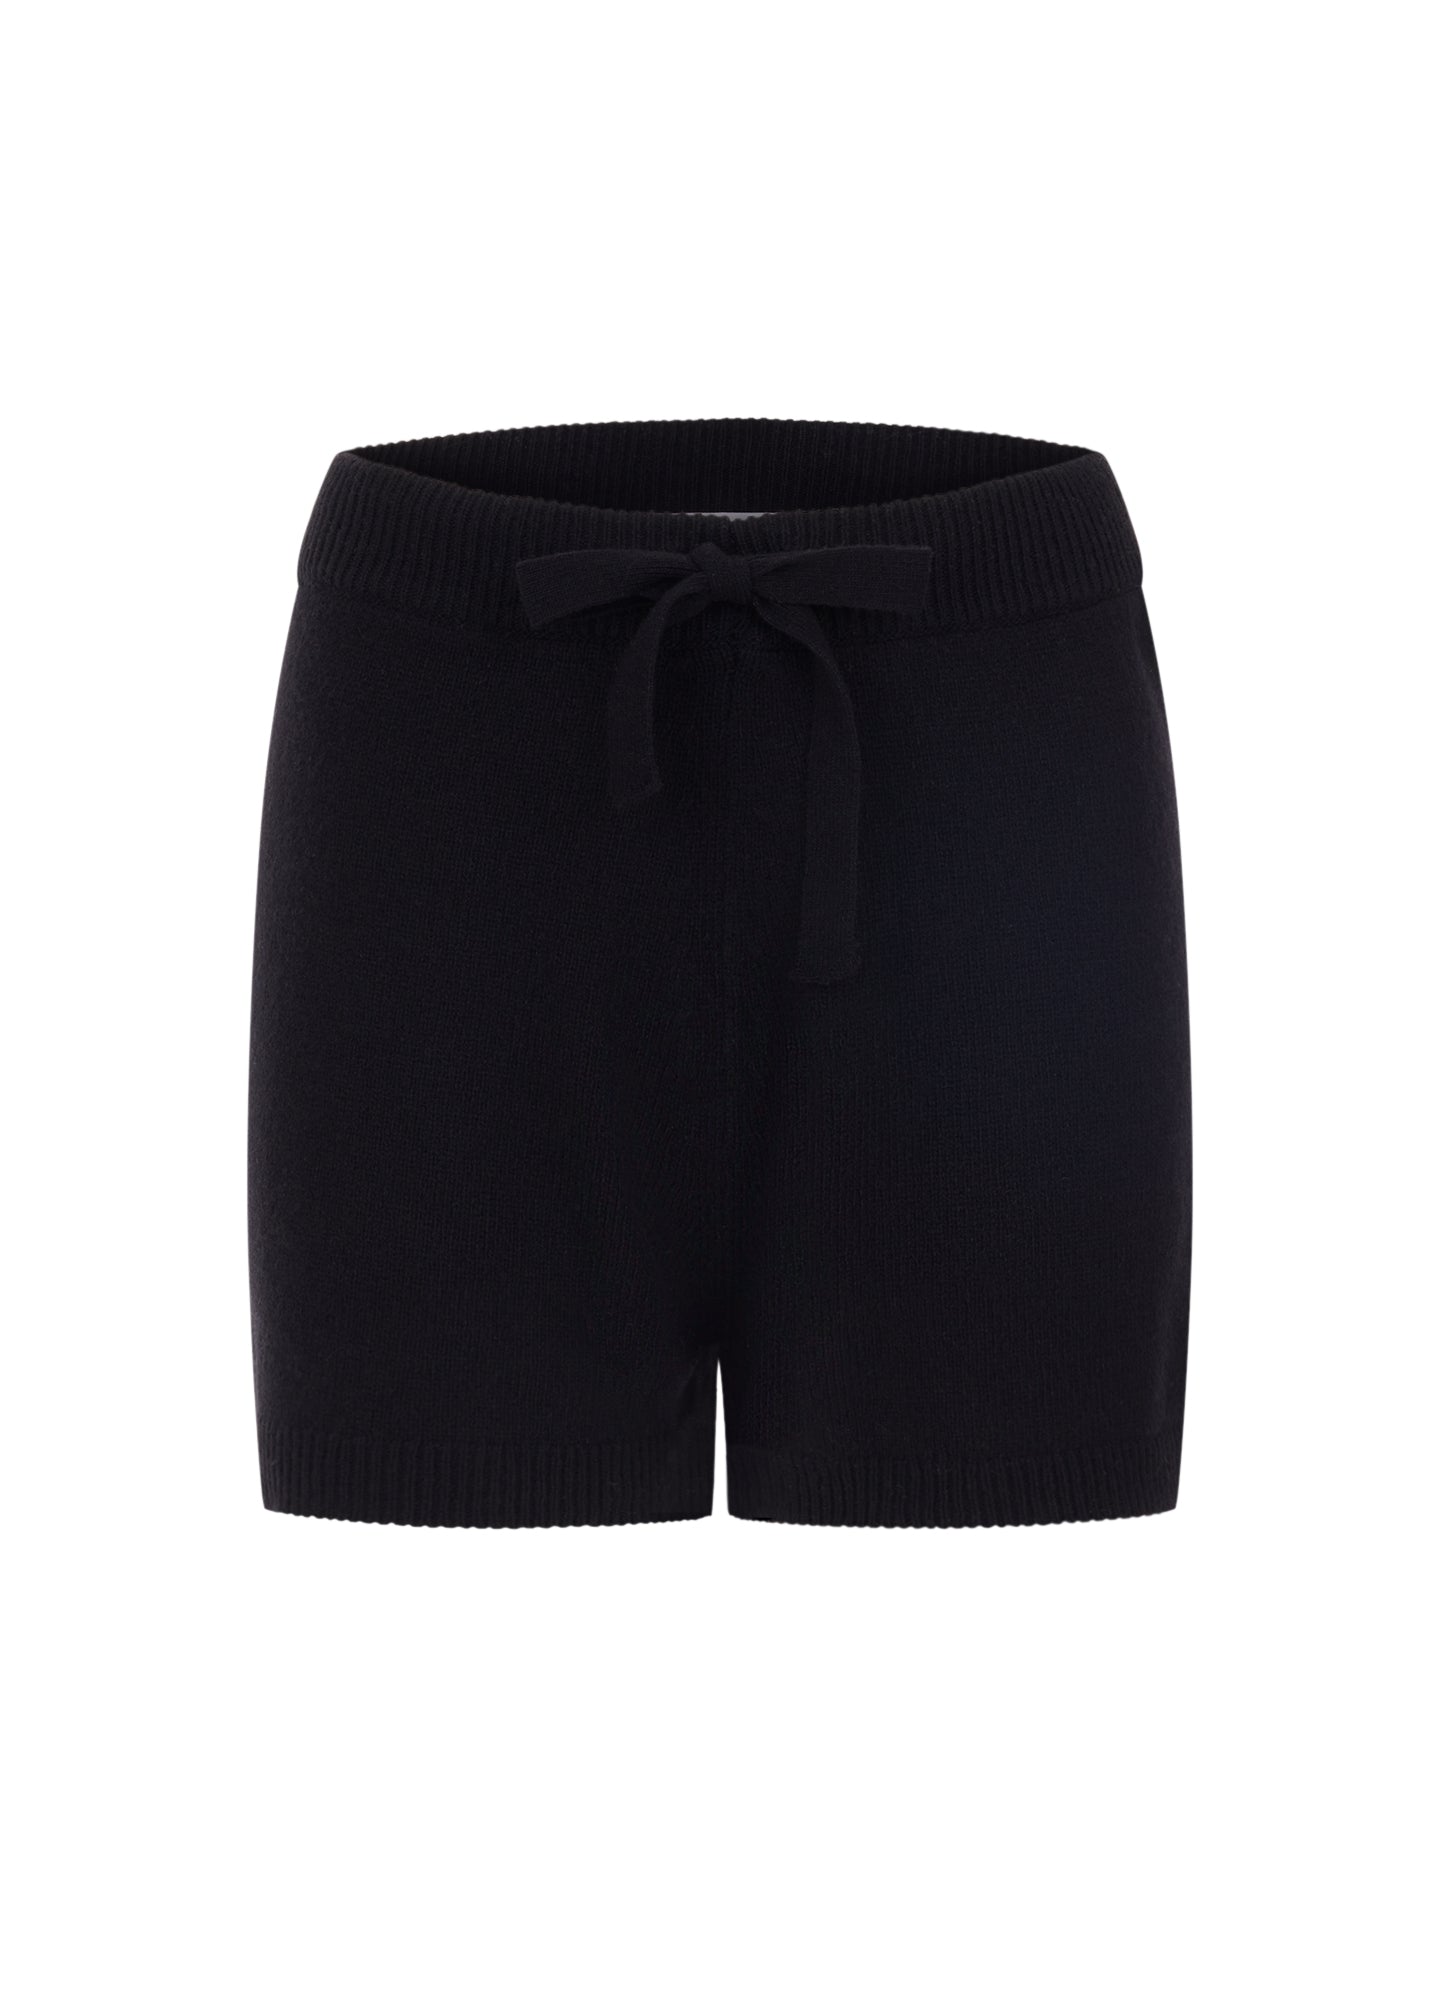 Designer cashmere knitted shorts with drawstring Black